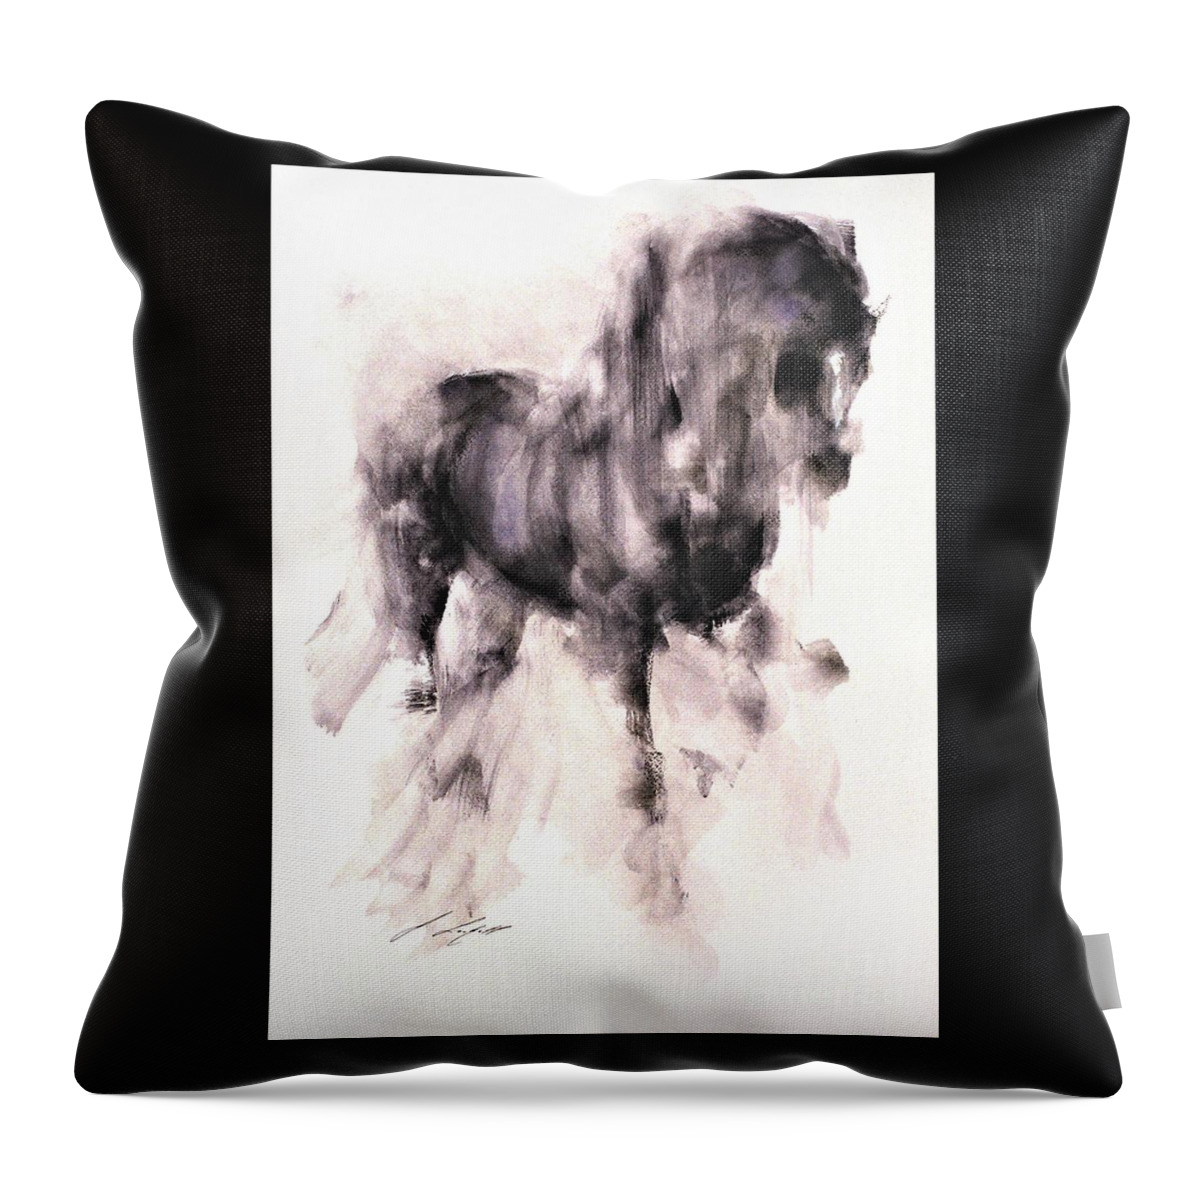 Horse Painting Throw Pillow featuring the painting Oman by Janette Lockett